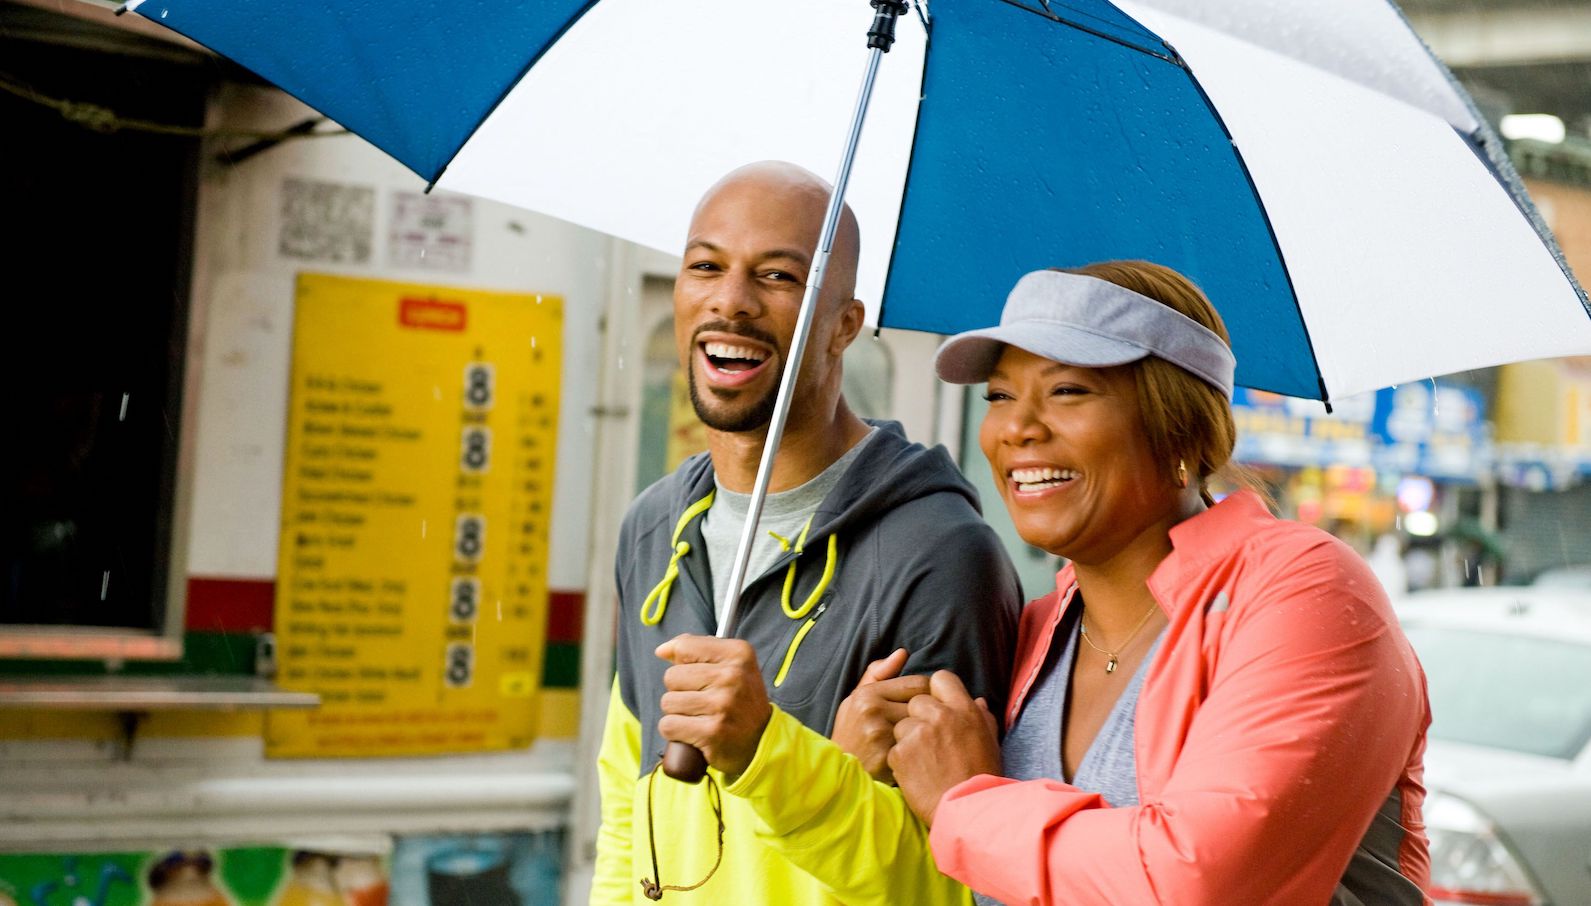 A man in yellow and gray windbreaker and a woman in a pink jacket stand under a blue and white umbrella in the rain smiling